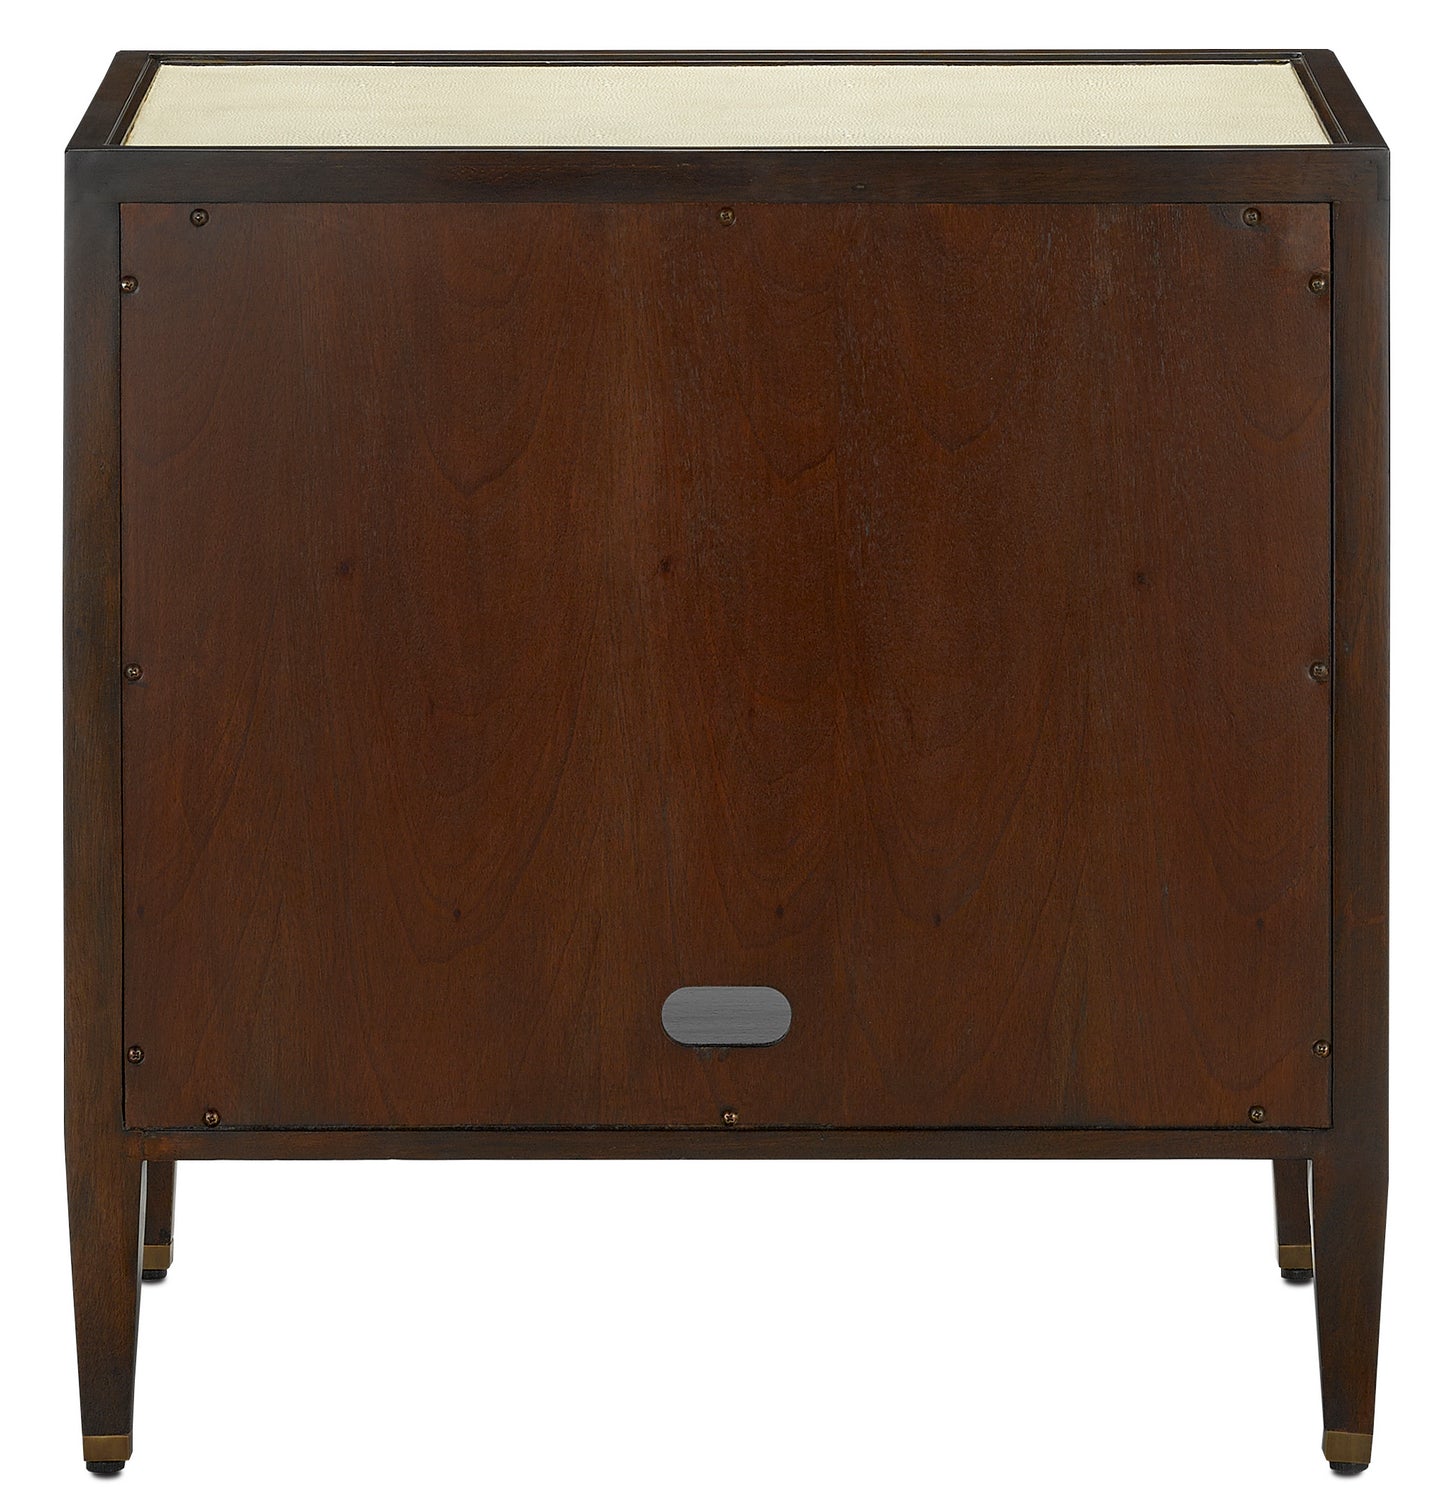 Nightstand from the Evie collection in Ivory/Dark Walnut/Brass finish